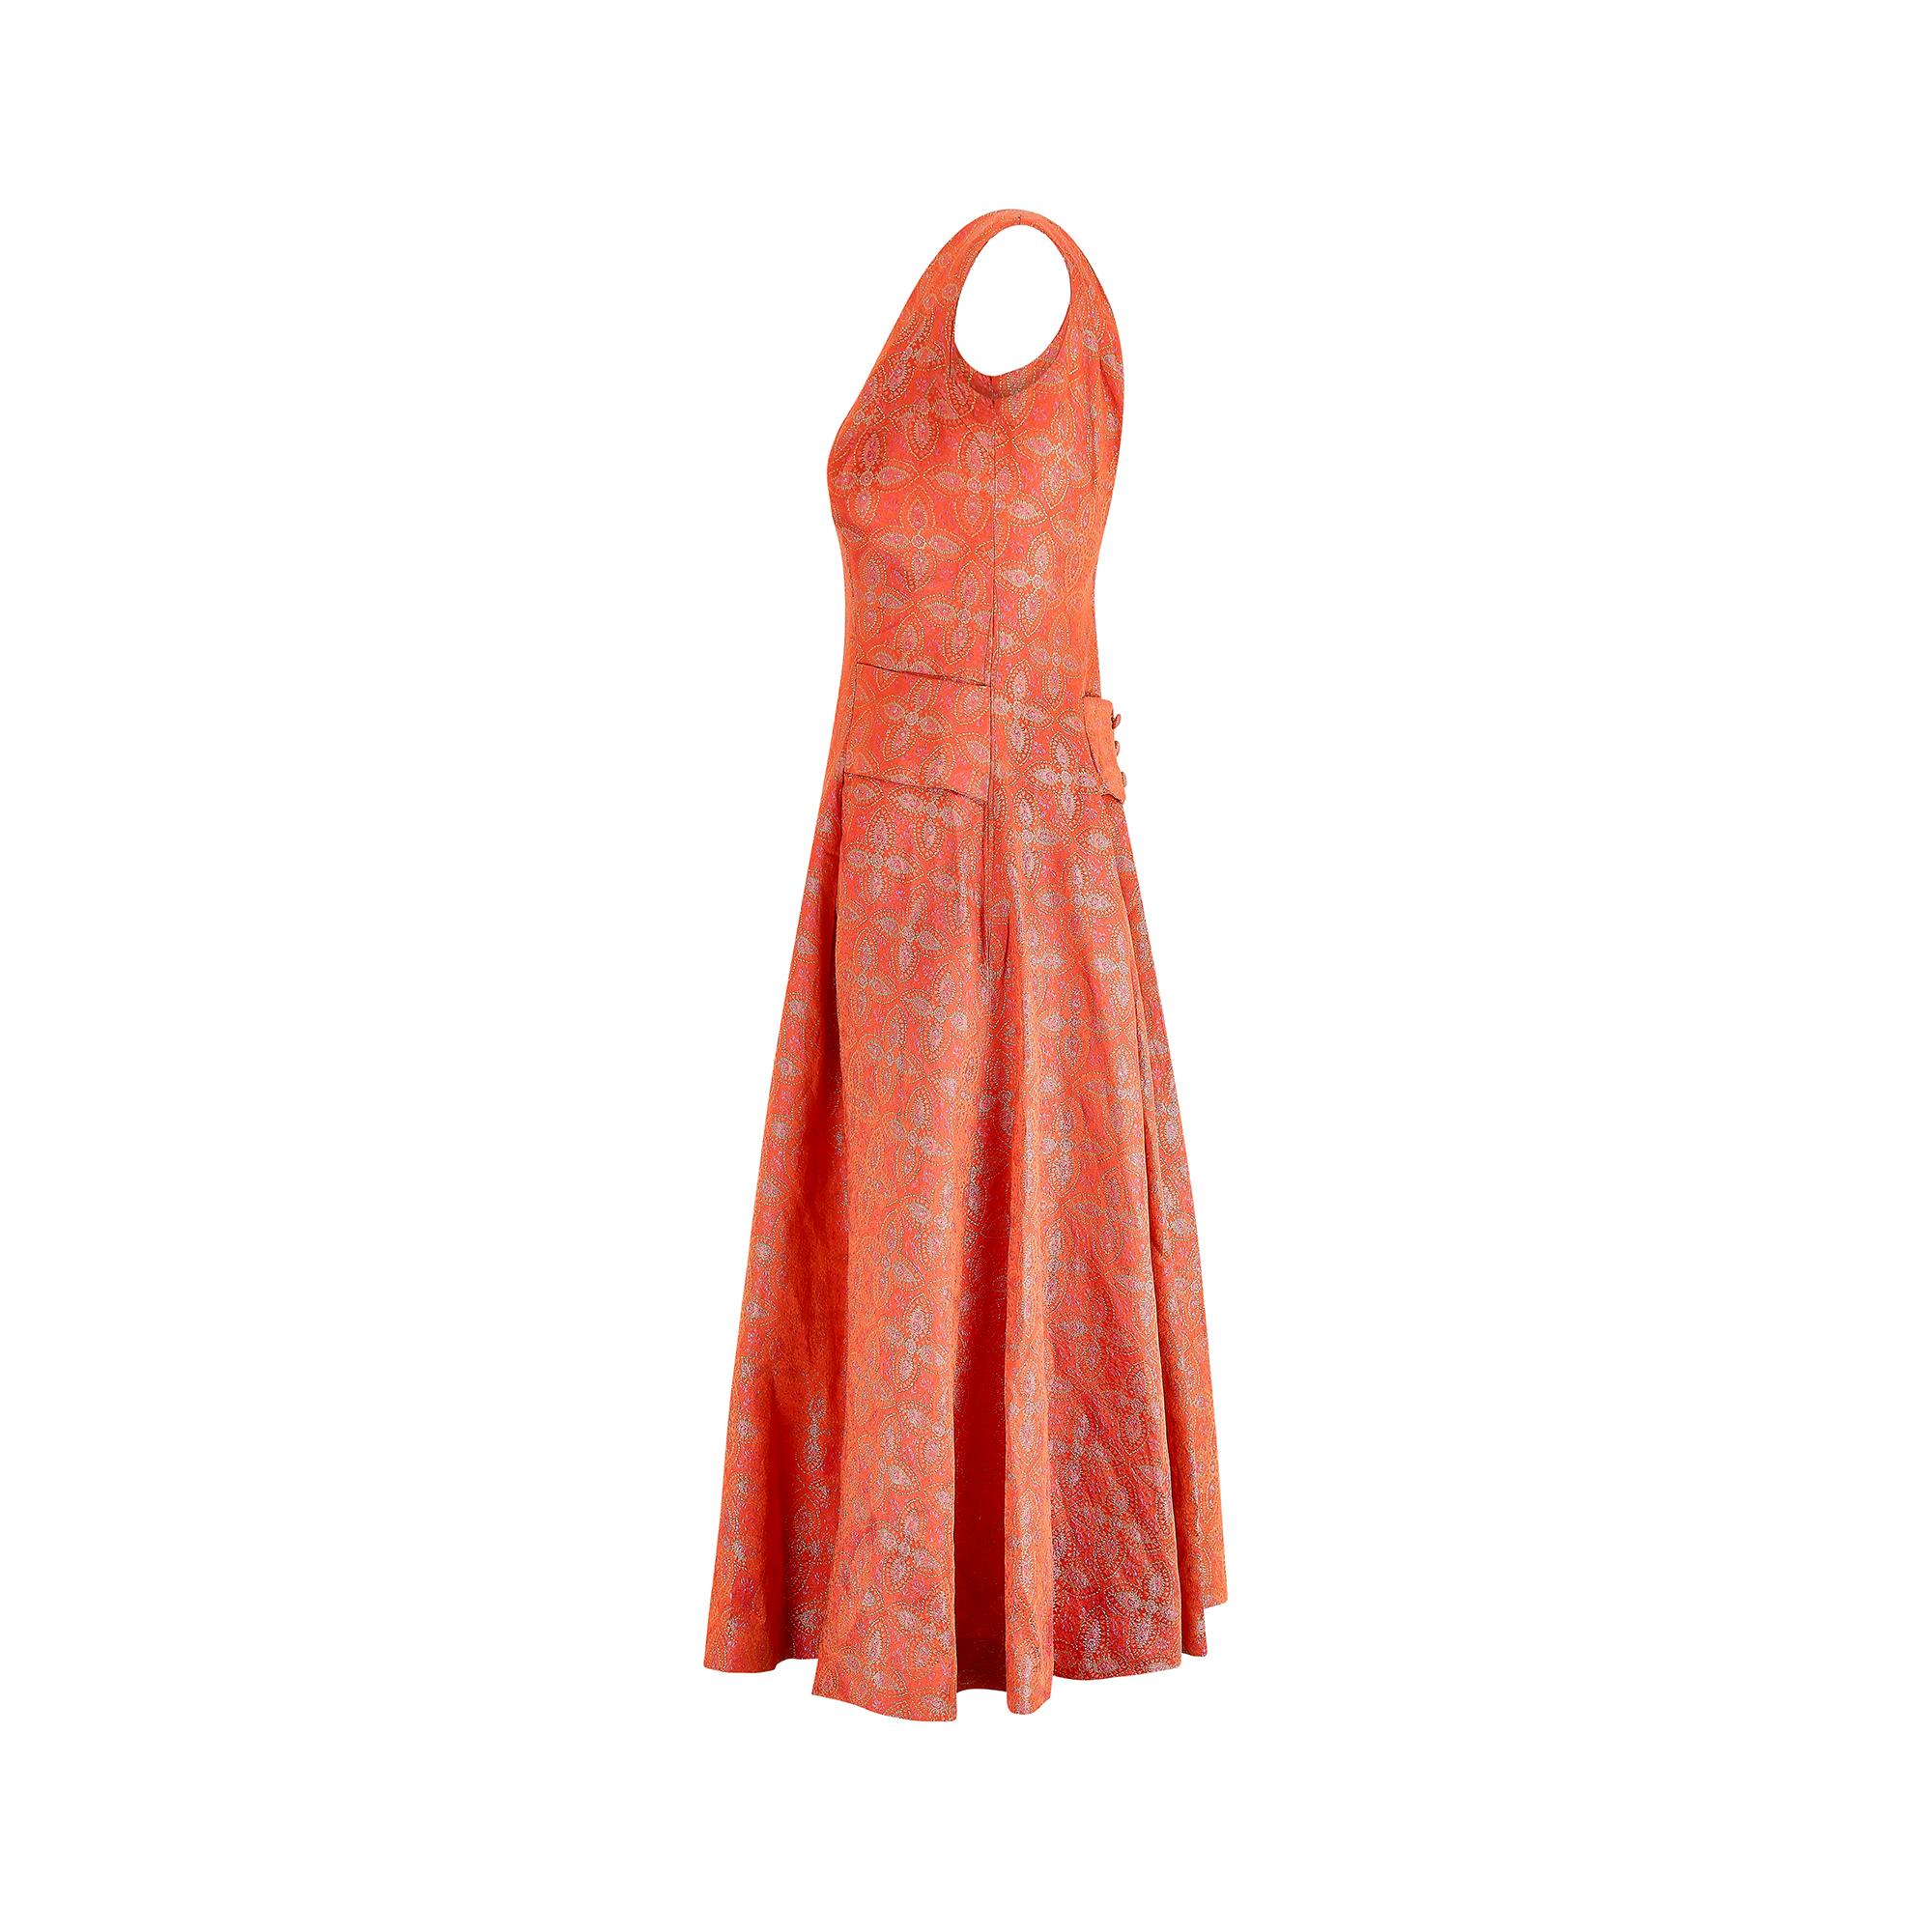 1950s Hardy Amies Orange Paisley Brocade Dress In Excellent Condition For Sale In London, GB